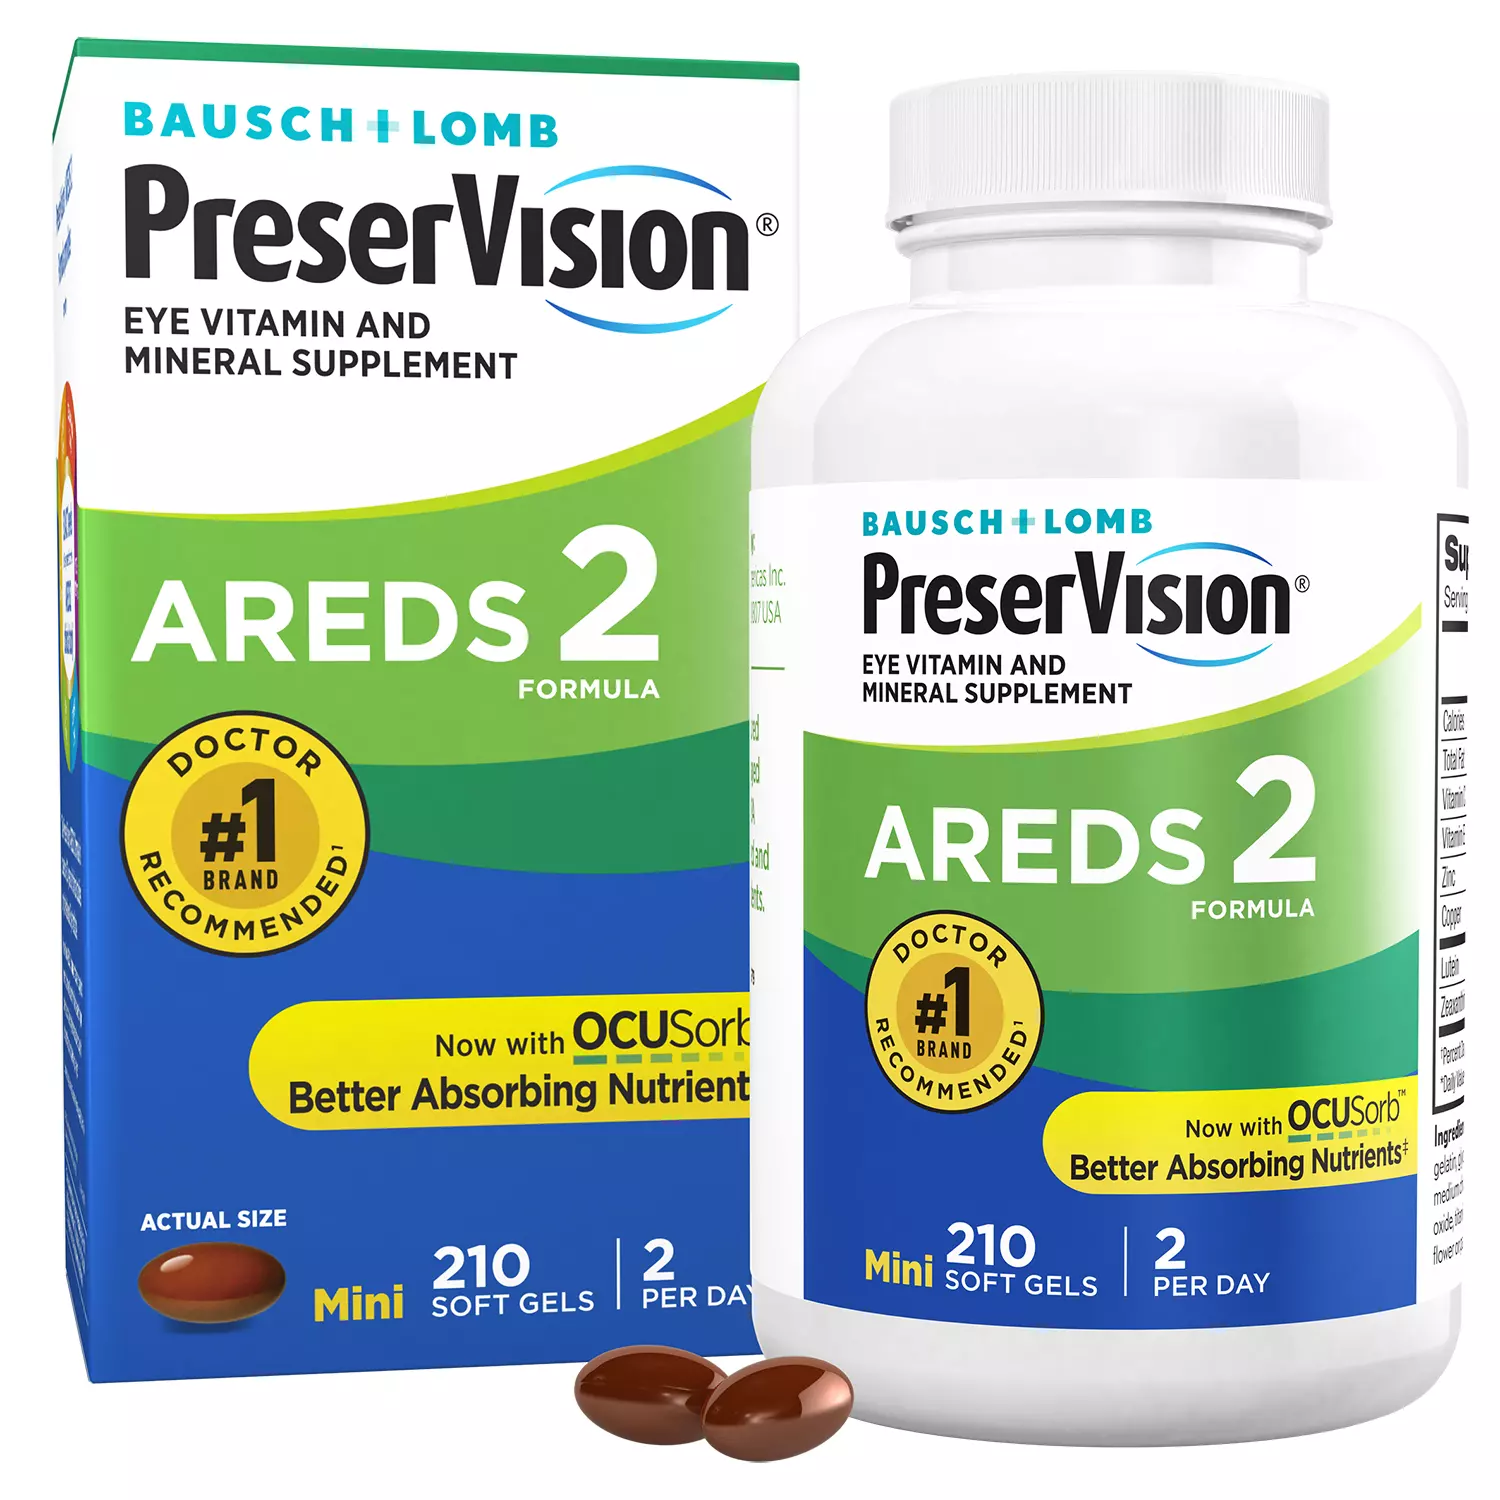 Bausch & Lomb PreserVision AREDS 2 Formula Supplement (210ct)